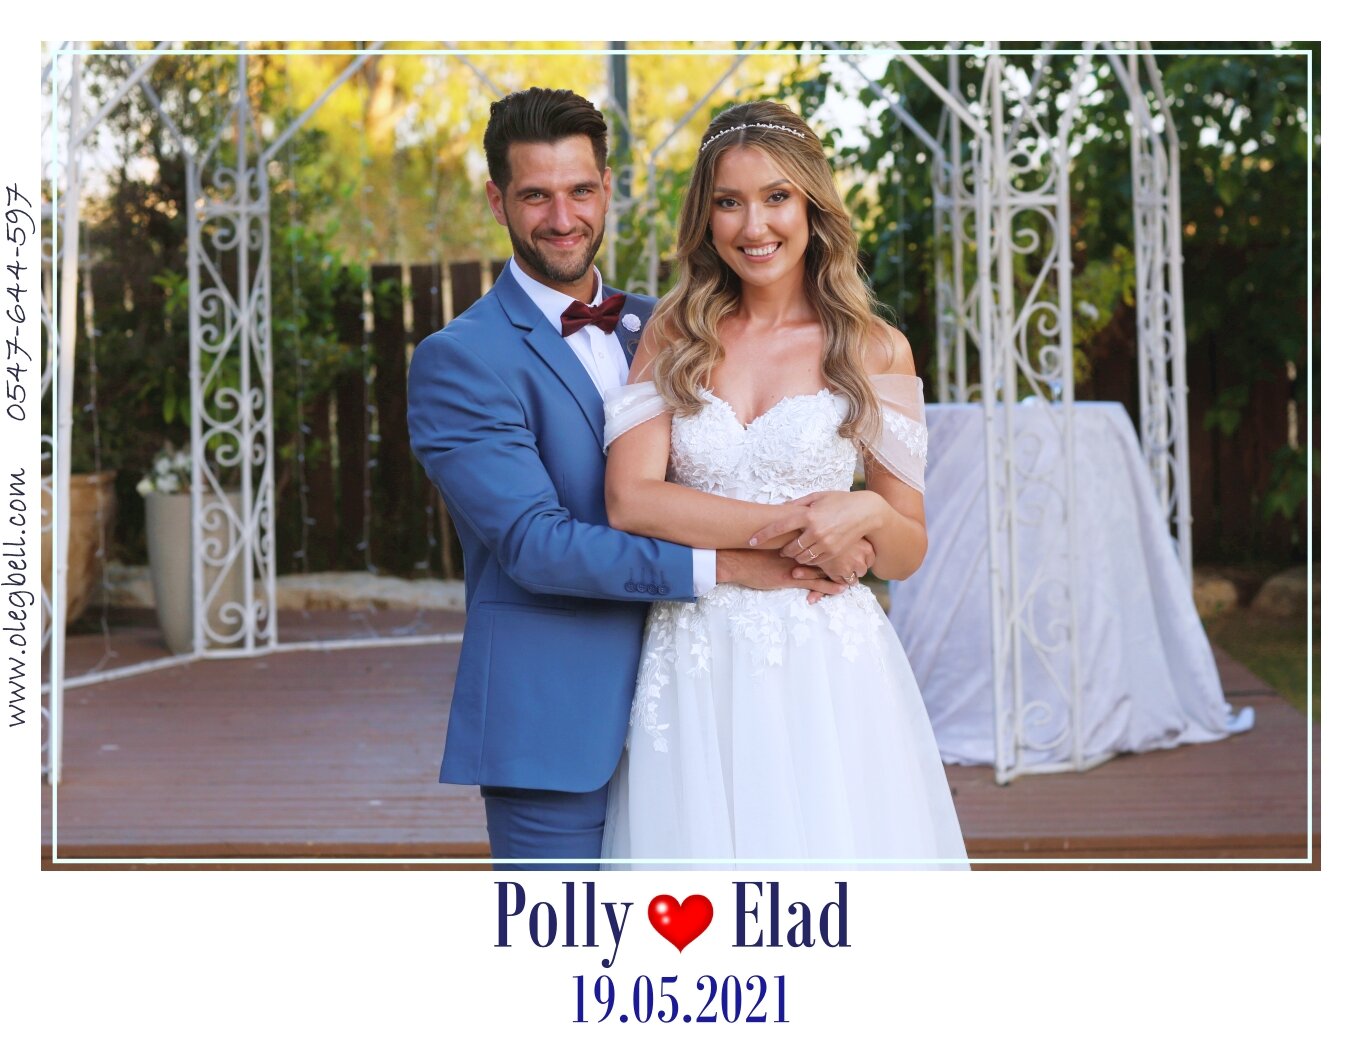 POLLY_AND_ELAD_WD_MG_SITE_001.JPG